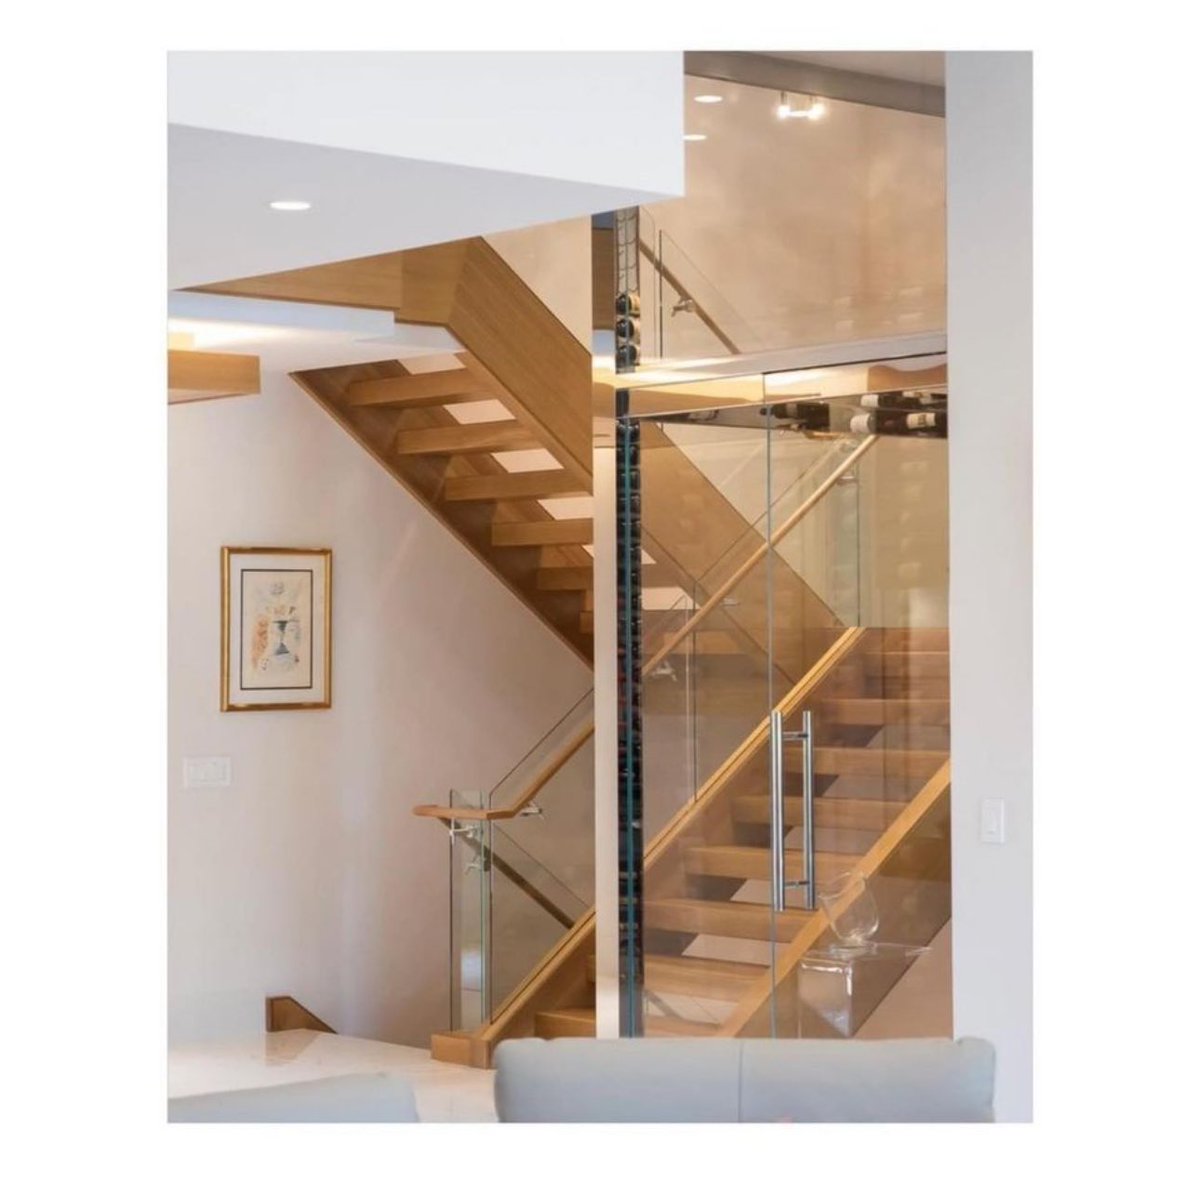 This dreamy mid-century modern staircase creates visual interest with a glass pocket design that is enhanced by natural oak and metal. We love how it’s flanked by the glass encased wine room. #Architecture #MidCenturyModern #CustomHome #DesignBuild #Michigan #JPCraig